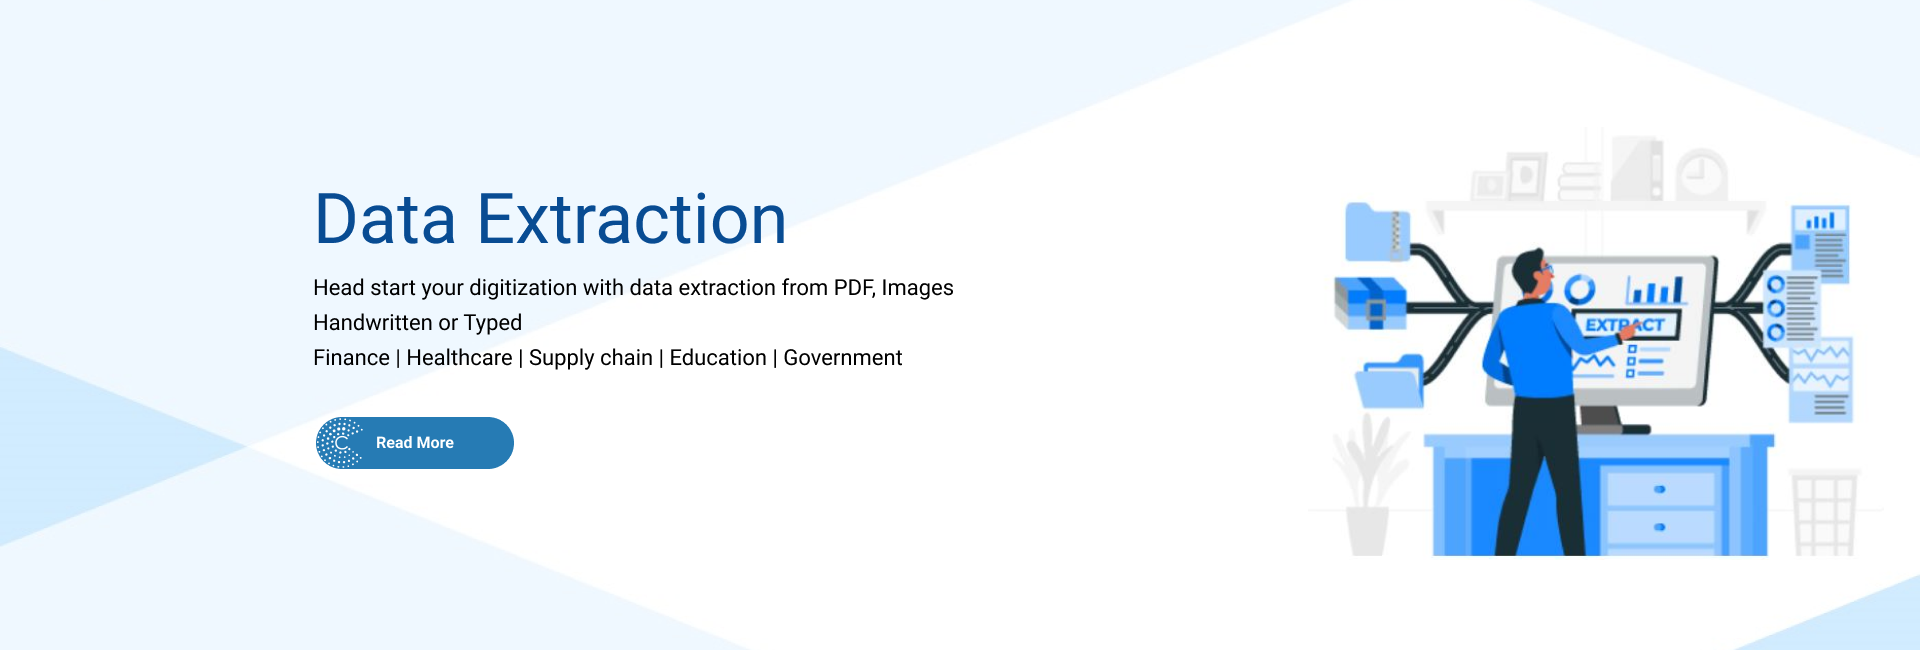 Data Extraction -  Head start your Digitalization with data extraction from PDFs, Images. Both typed and handwritten. Domain - Financial services, HealthCare, Logistics, Education, Goverment.